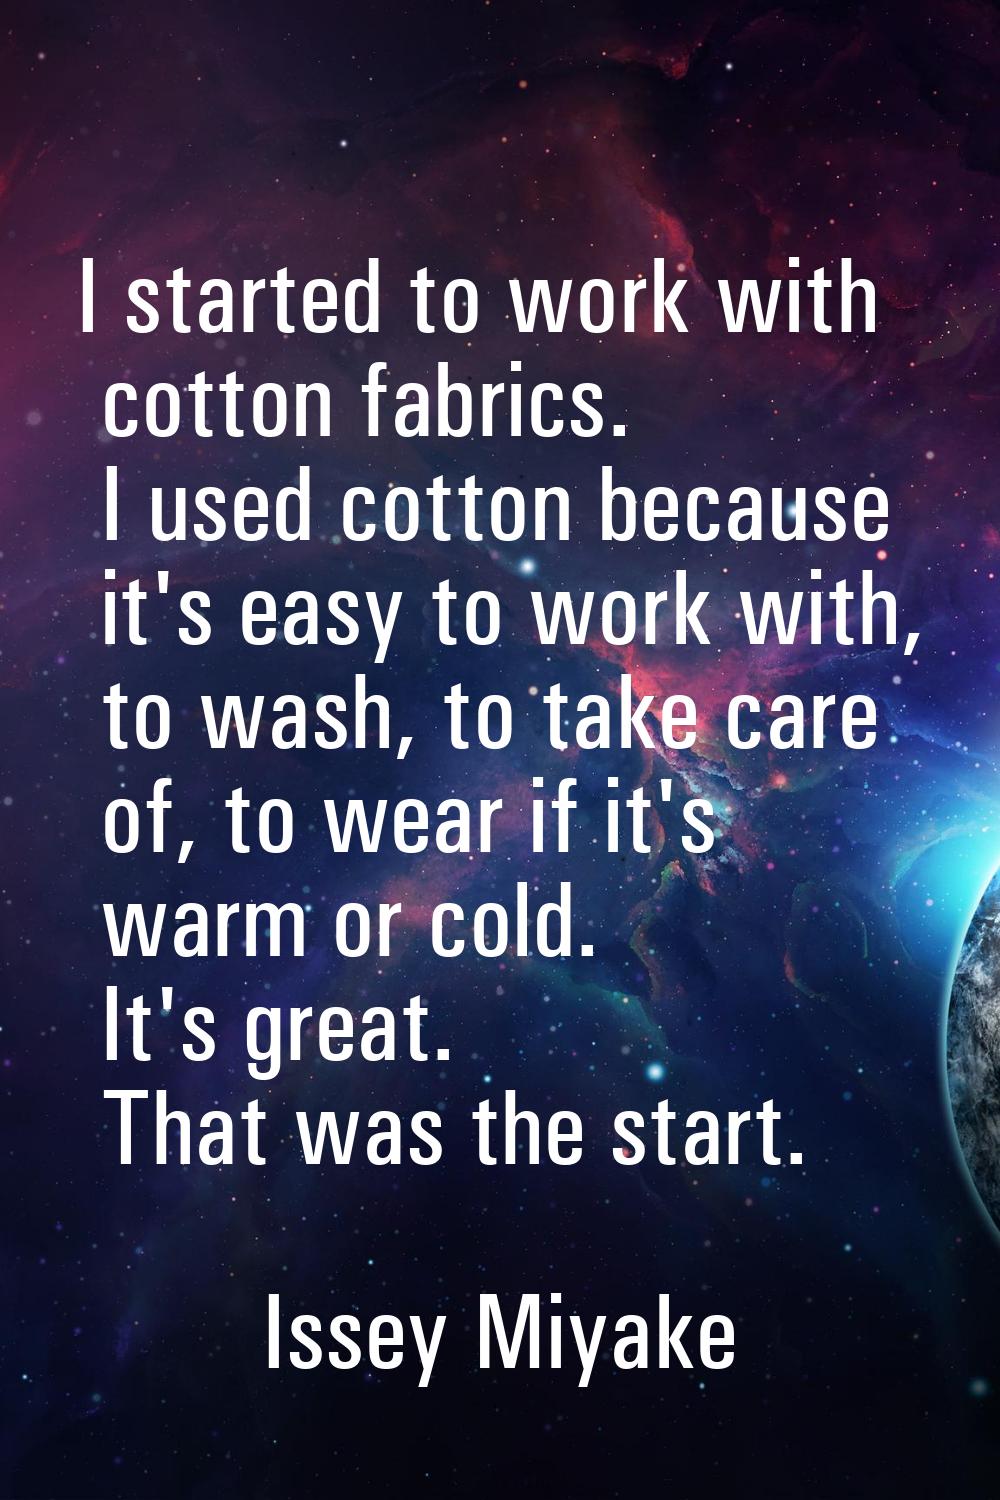 I started to work with cotton fabrics. I used cotton because it's easy to work with, to wash, to ta